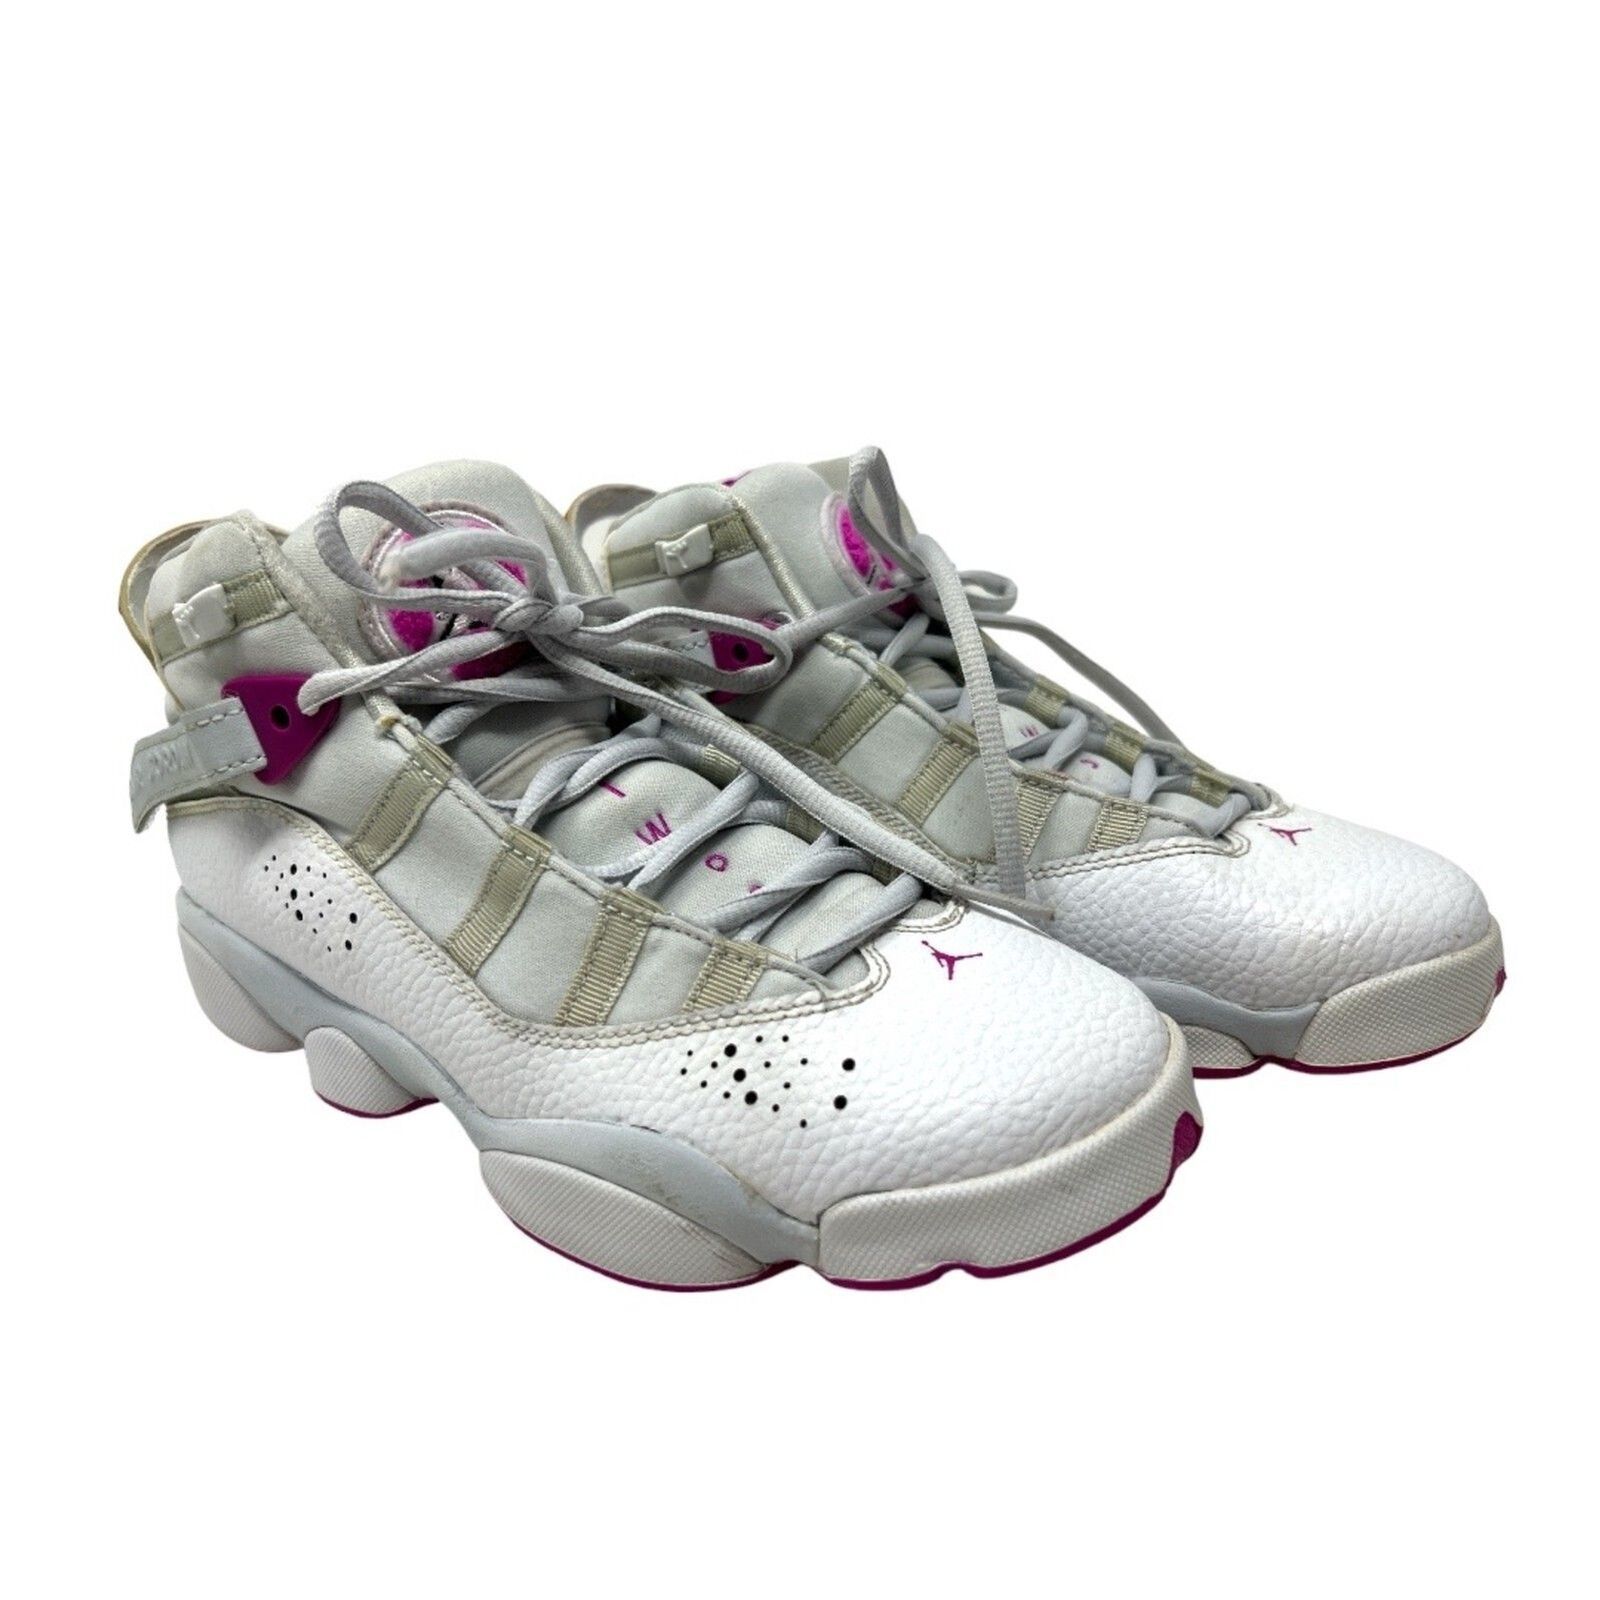 Primary image for NIke Jordan Air 6 rings sneakers 7 youth GS Platinum Fuchsia Basketball shoes